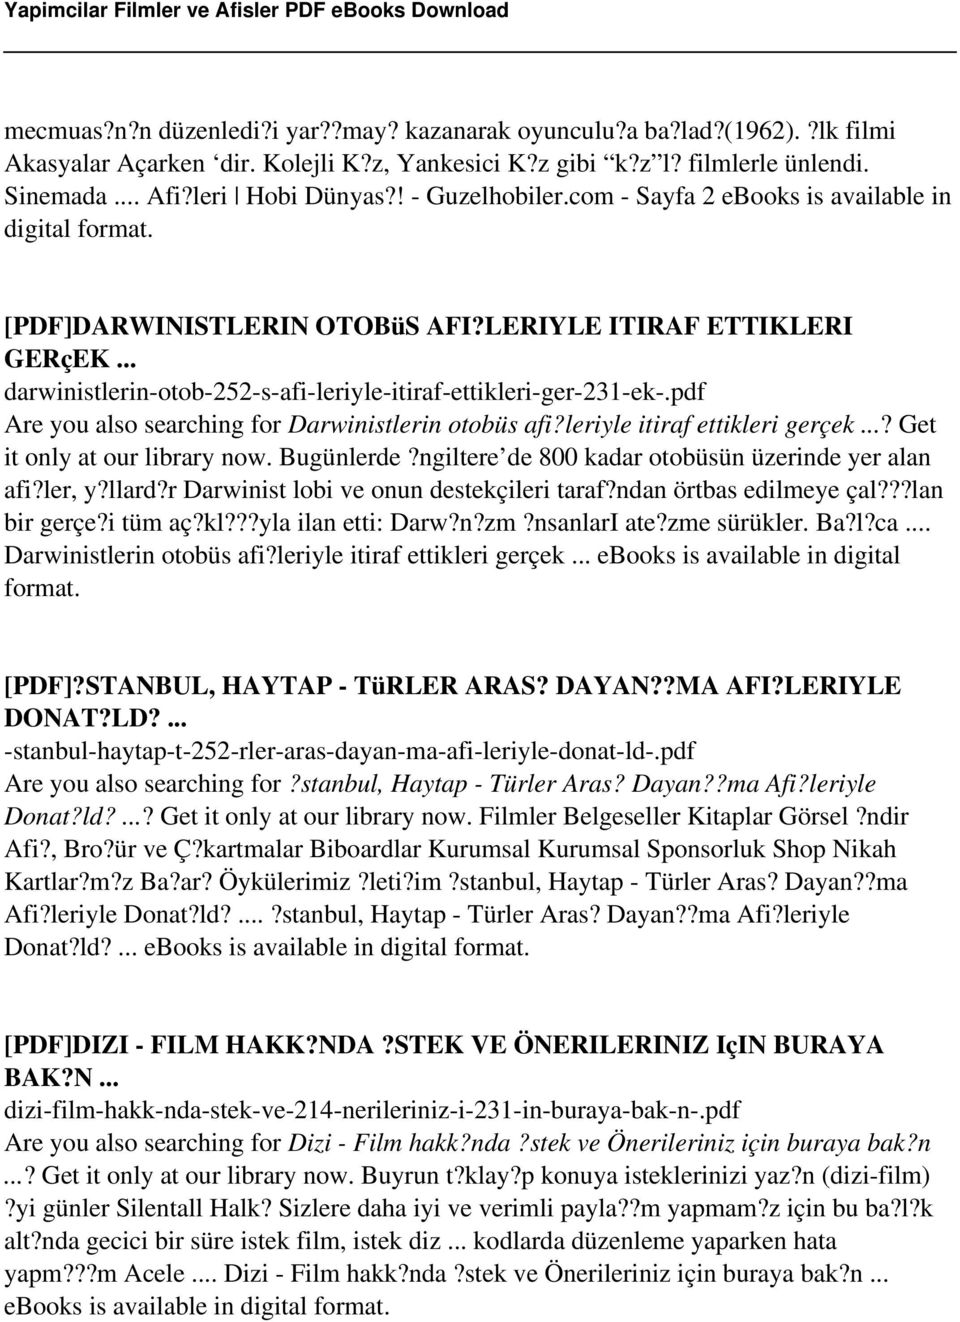 .. darwinistlerin-otob-252-s-afi-leriyle-itiraf-ettikleri-ger-231-ek-.pdf Are you also searching for Darwinistlerin otobüs afi?leriyle itiraf ettikleri gerçek...? Get it only at our library now.